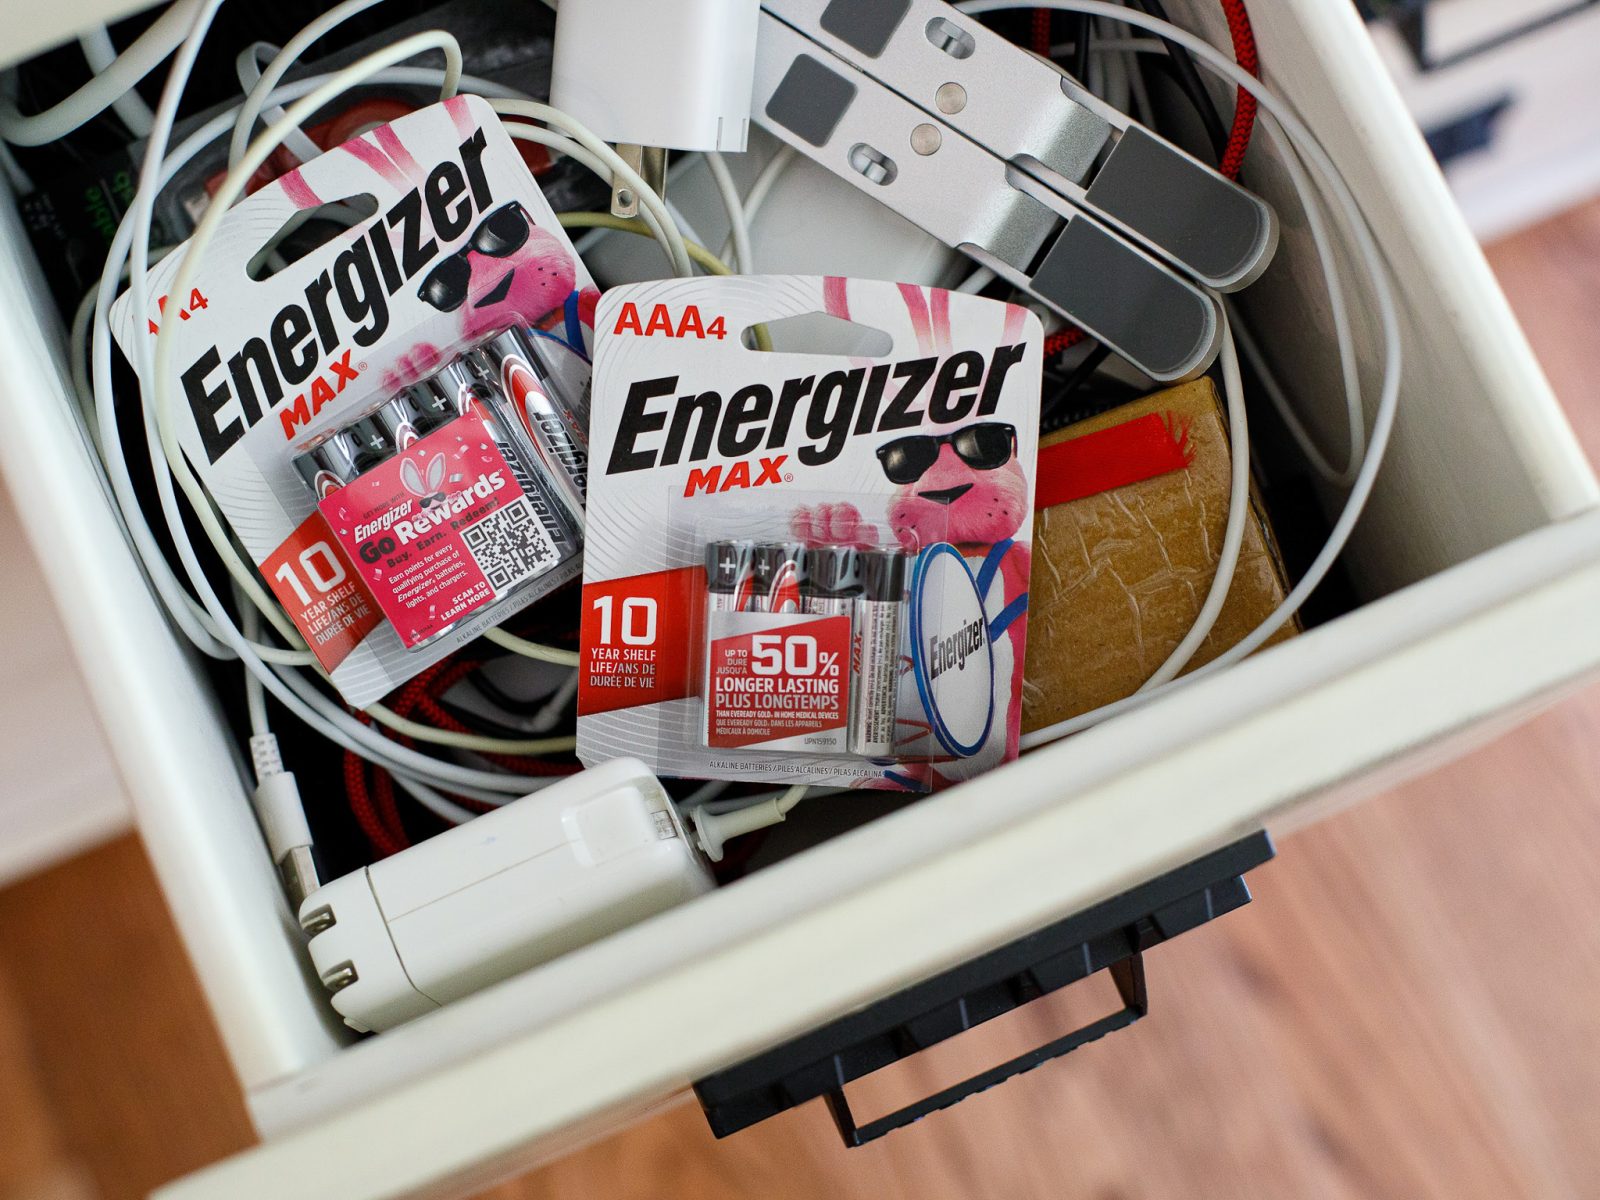 Energizer Batteries As Low As $3.49 At Kroger – Almost Half Price